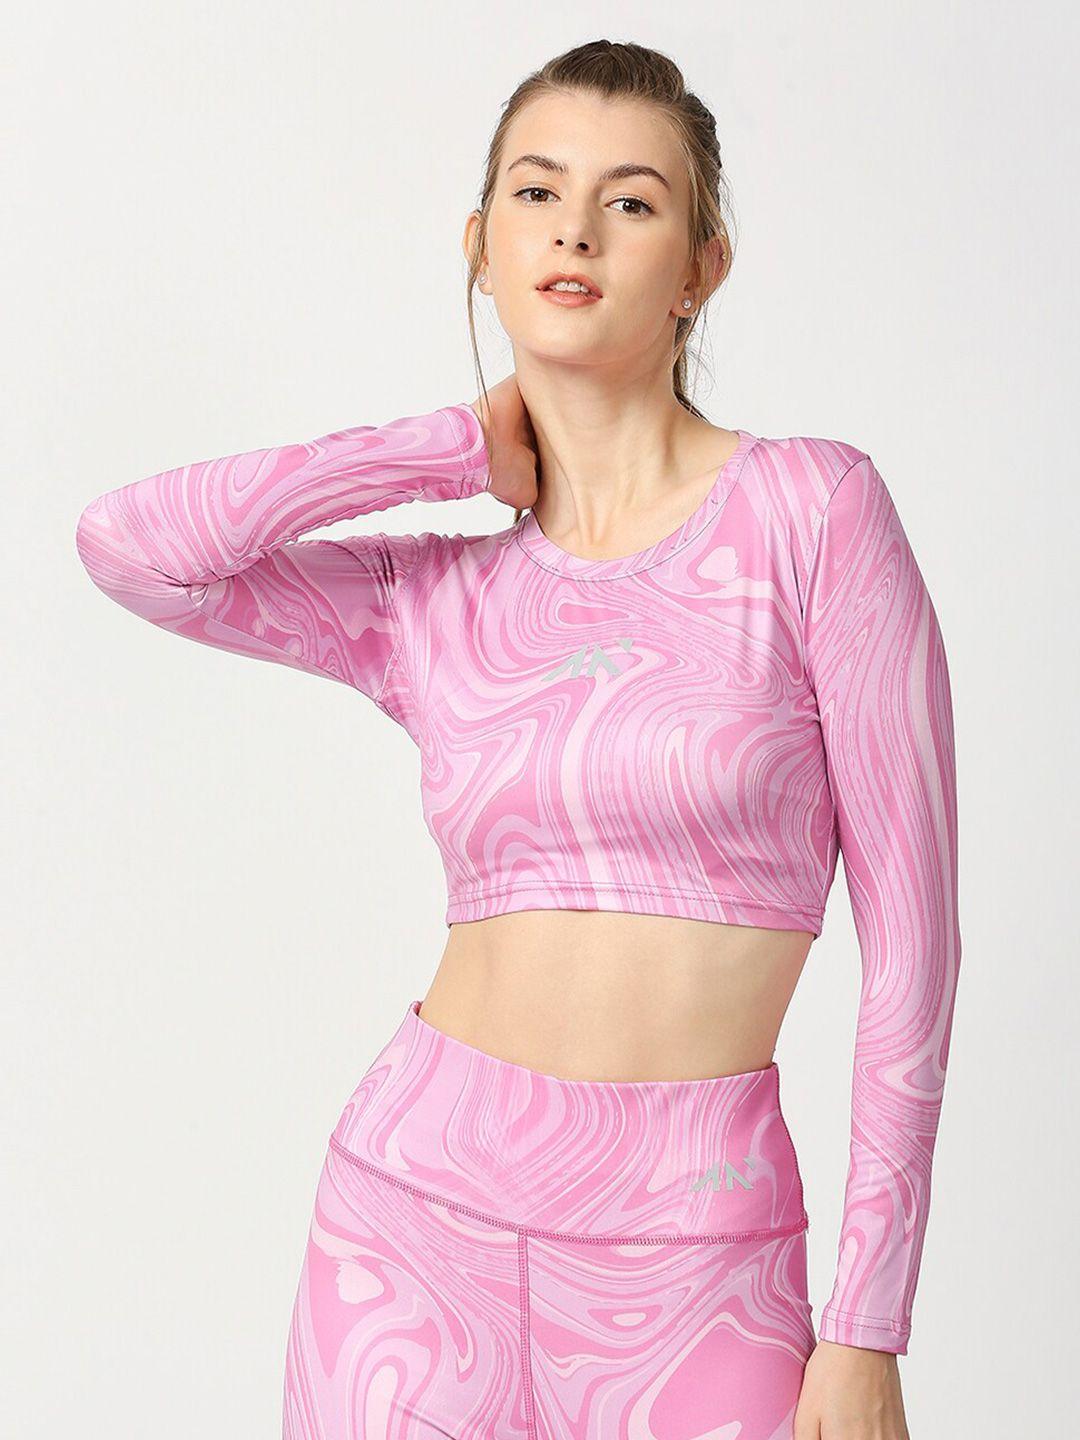 aesthetic nation woman pink vogue crop top